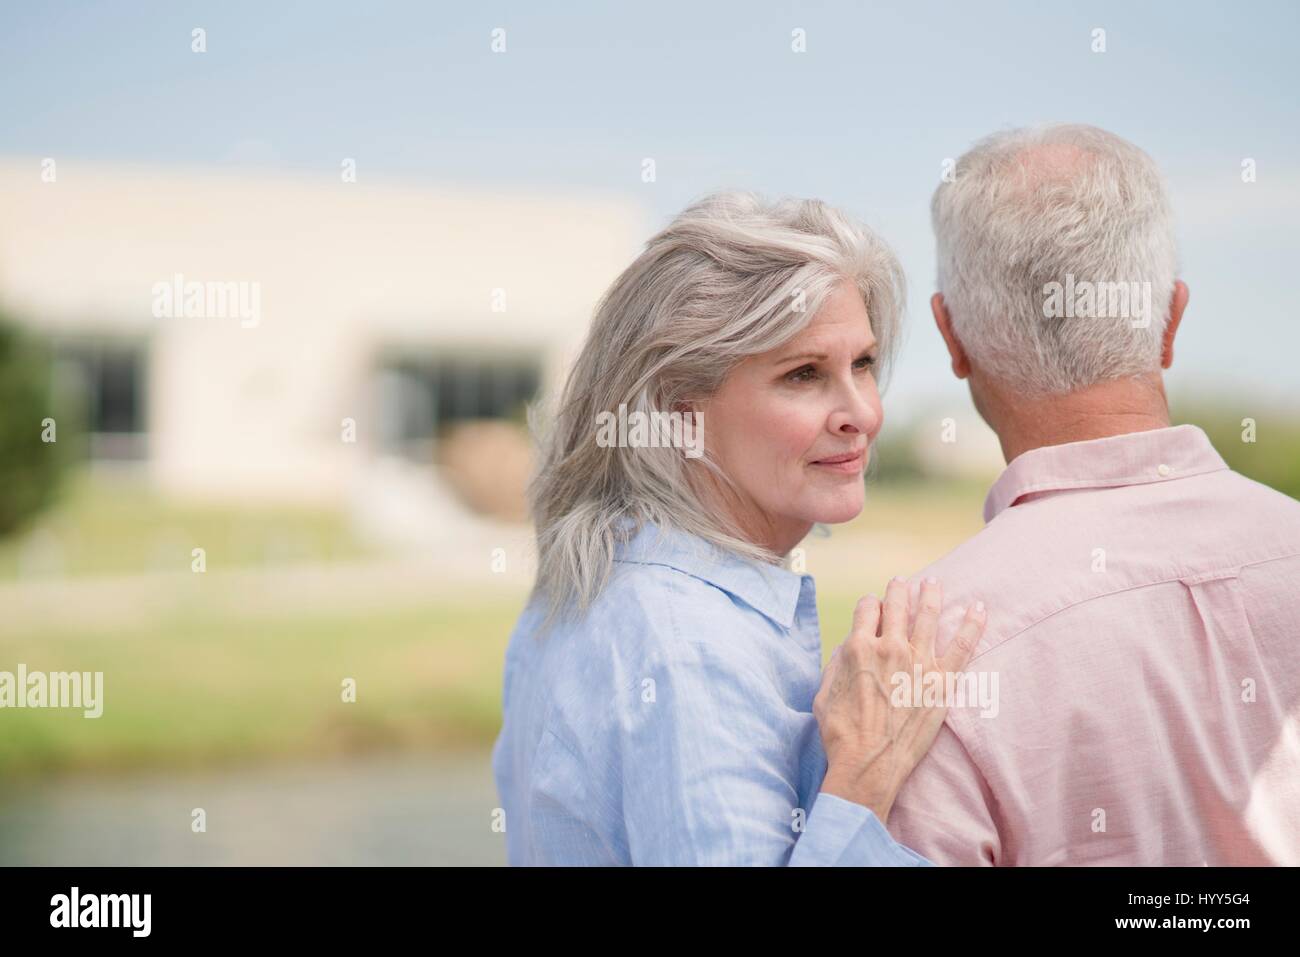 Senior woman with hand on man's shoulder. Stock Photo